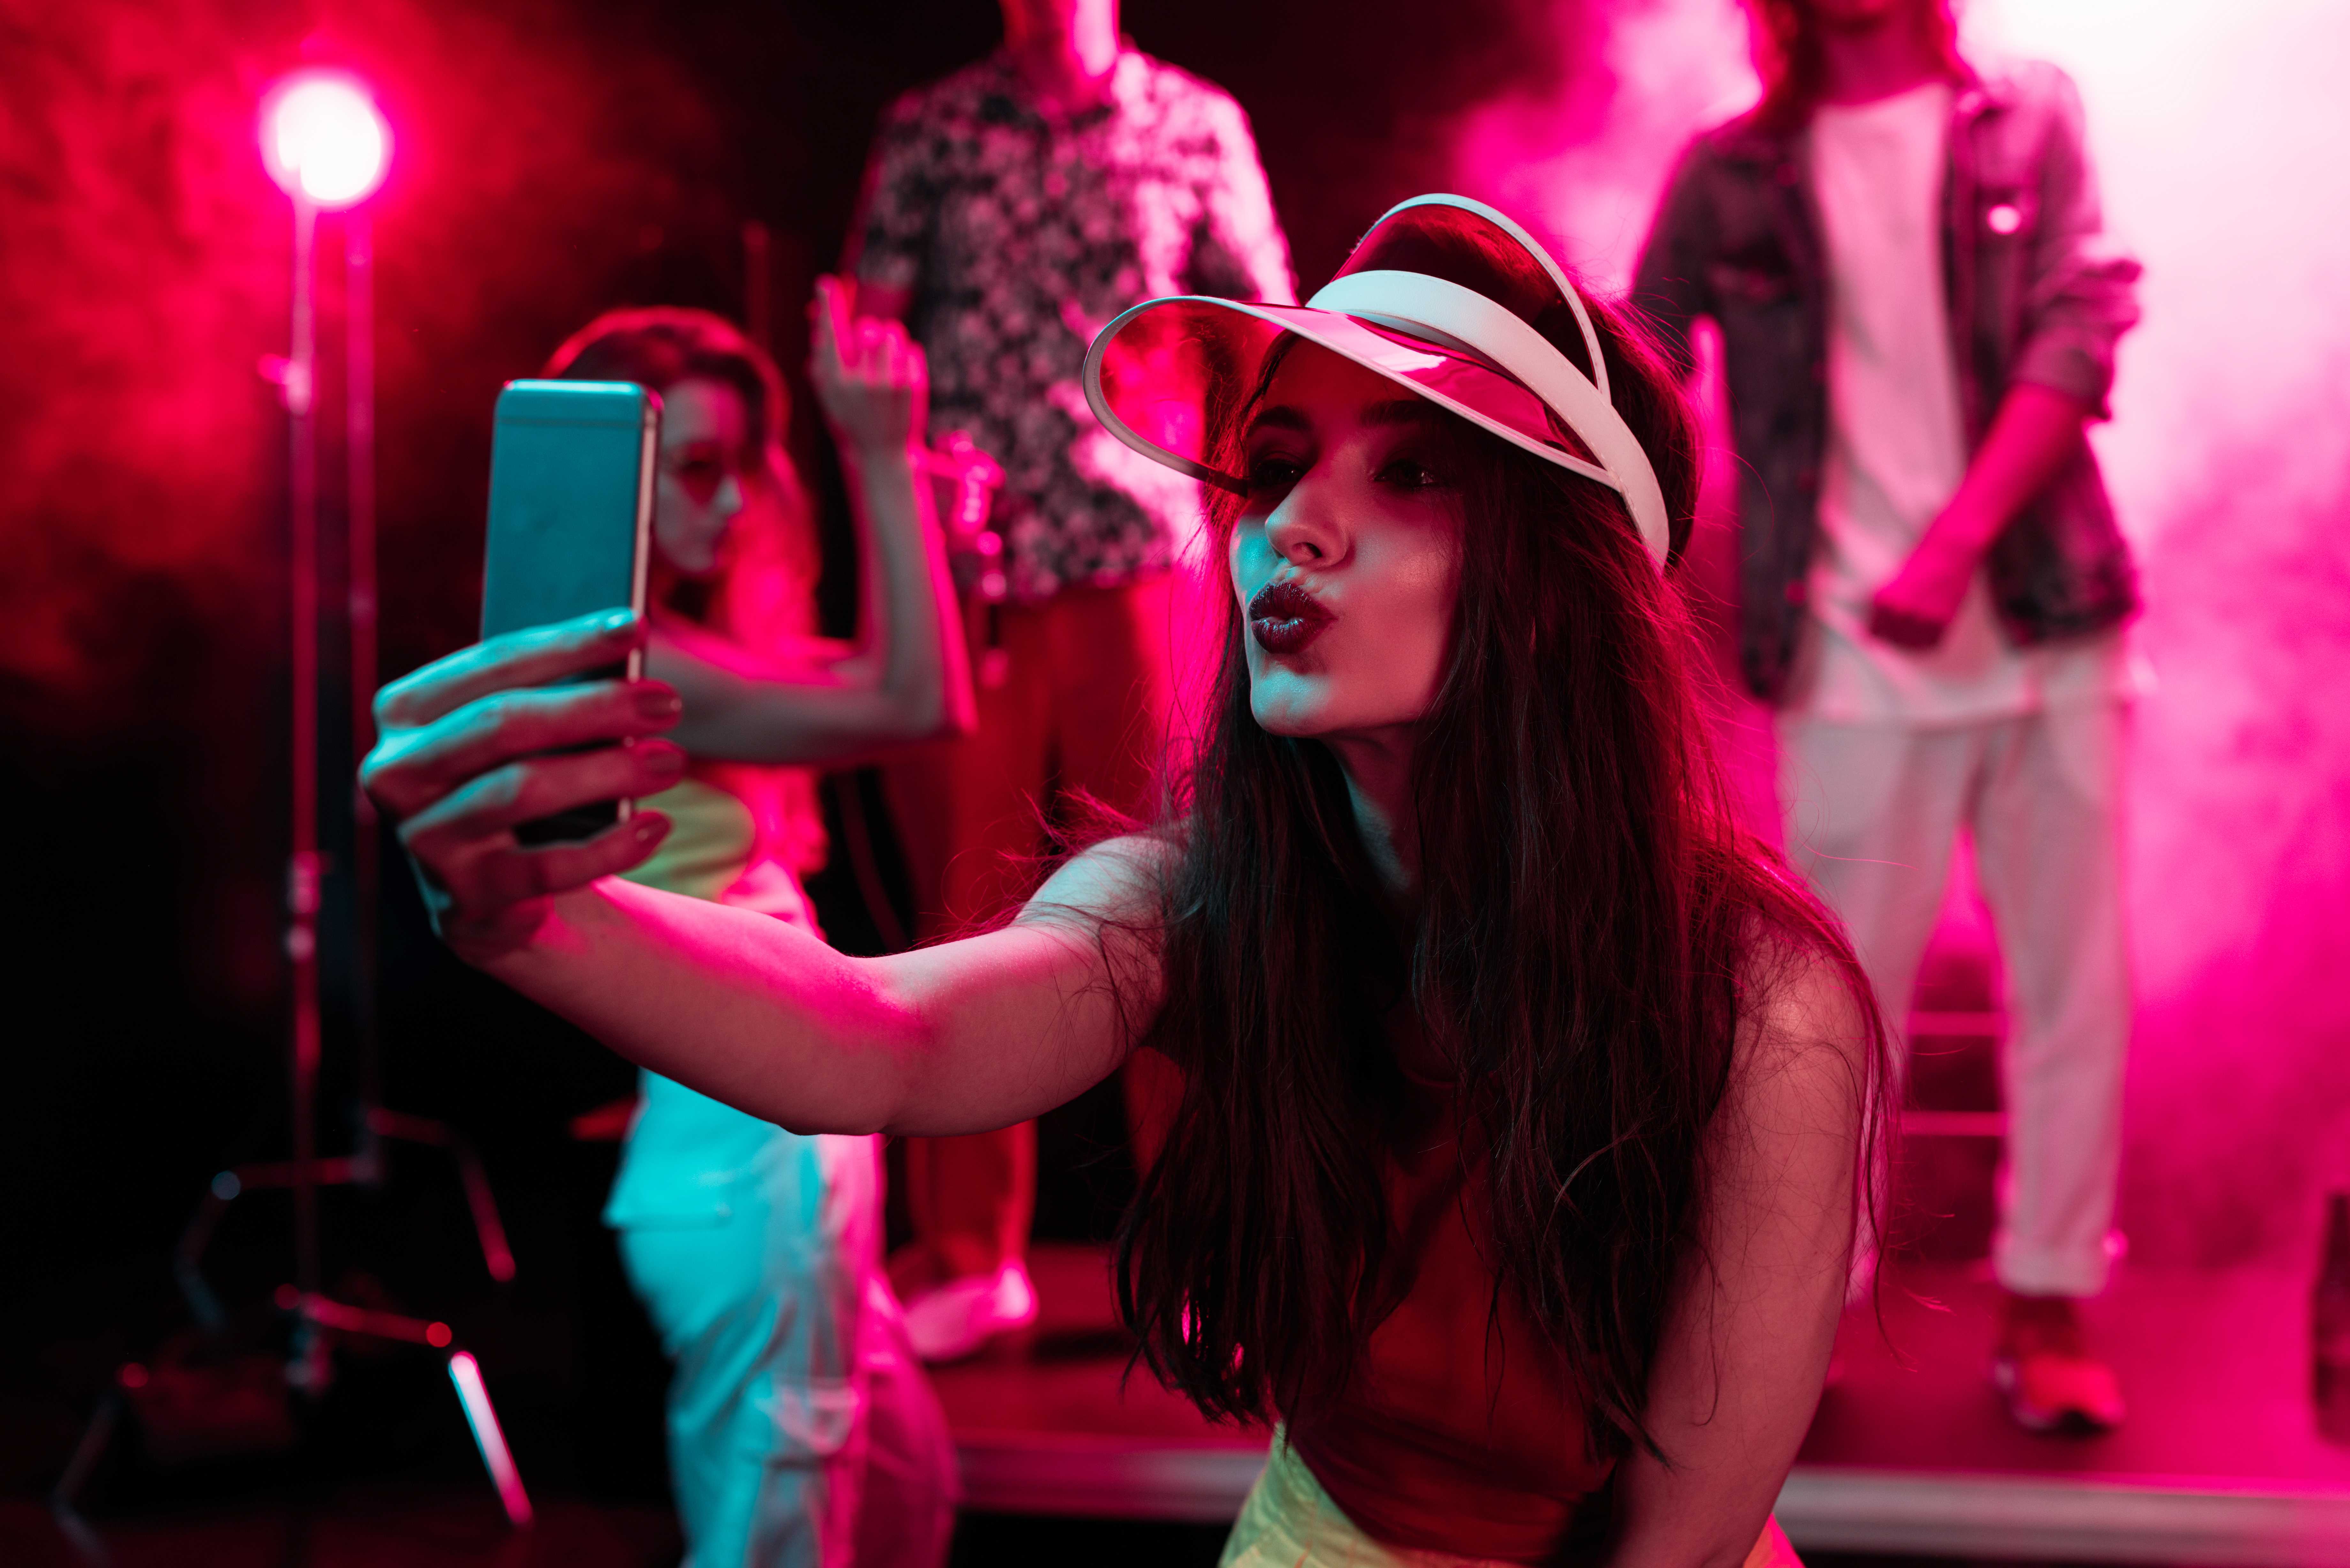 A young woman in a visor poses for a selfie in a room lit by pink neon lights. Behind her are another young woman and two men dancing surrounded by smoke